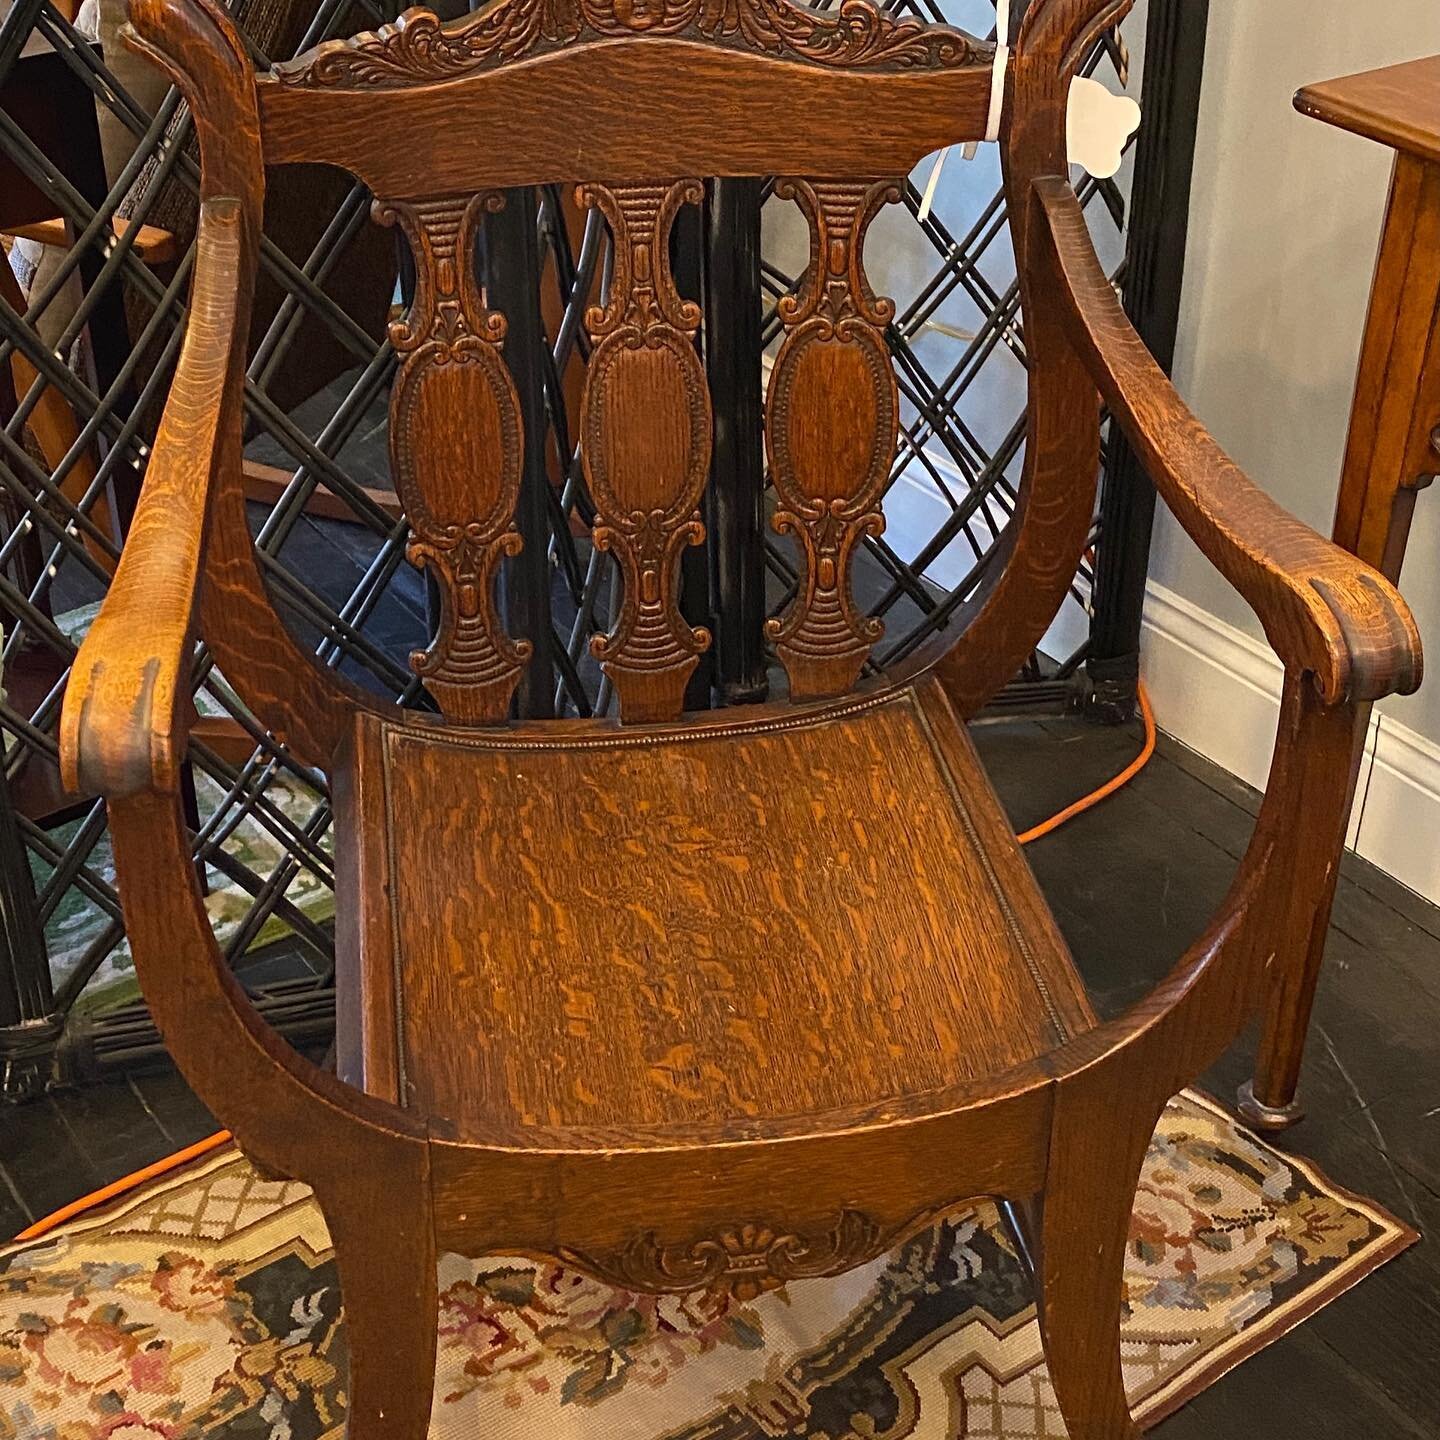 A couple of cool carved accent chairs that will feel at home anywhere.